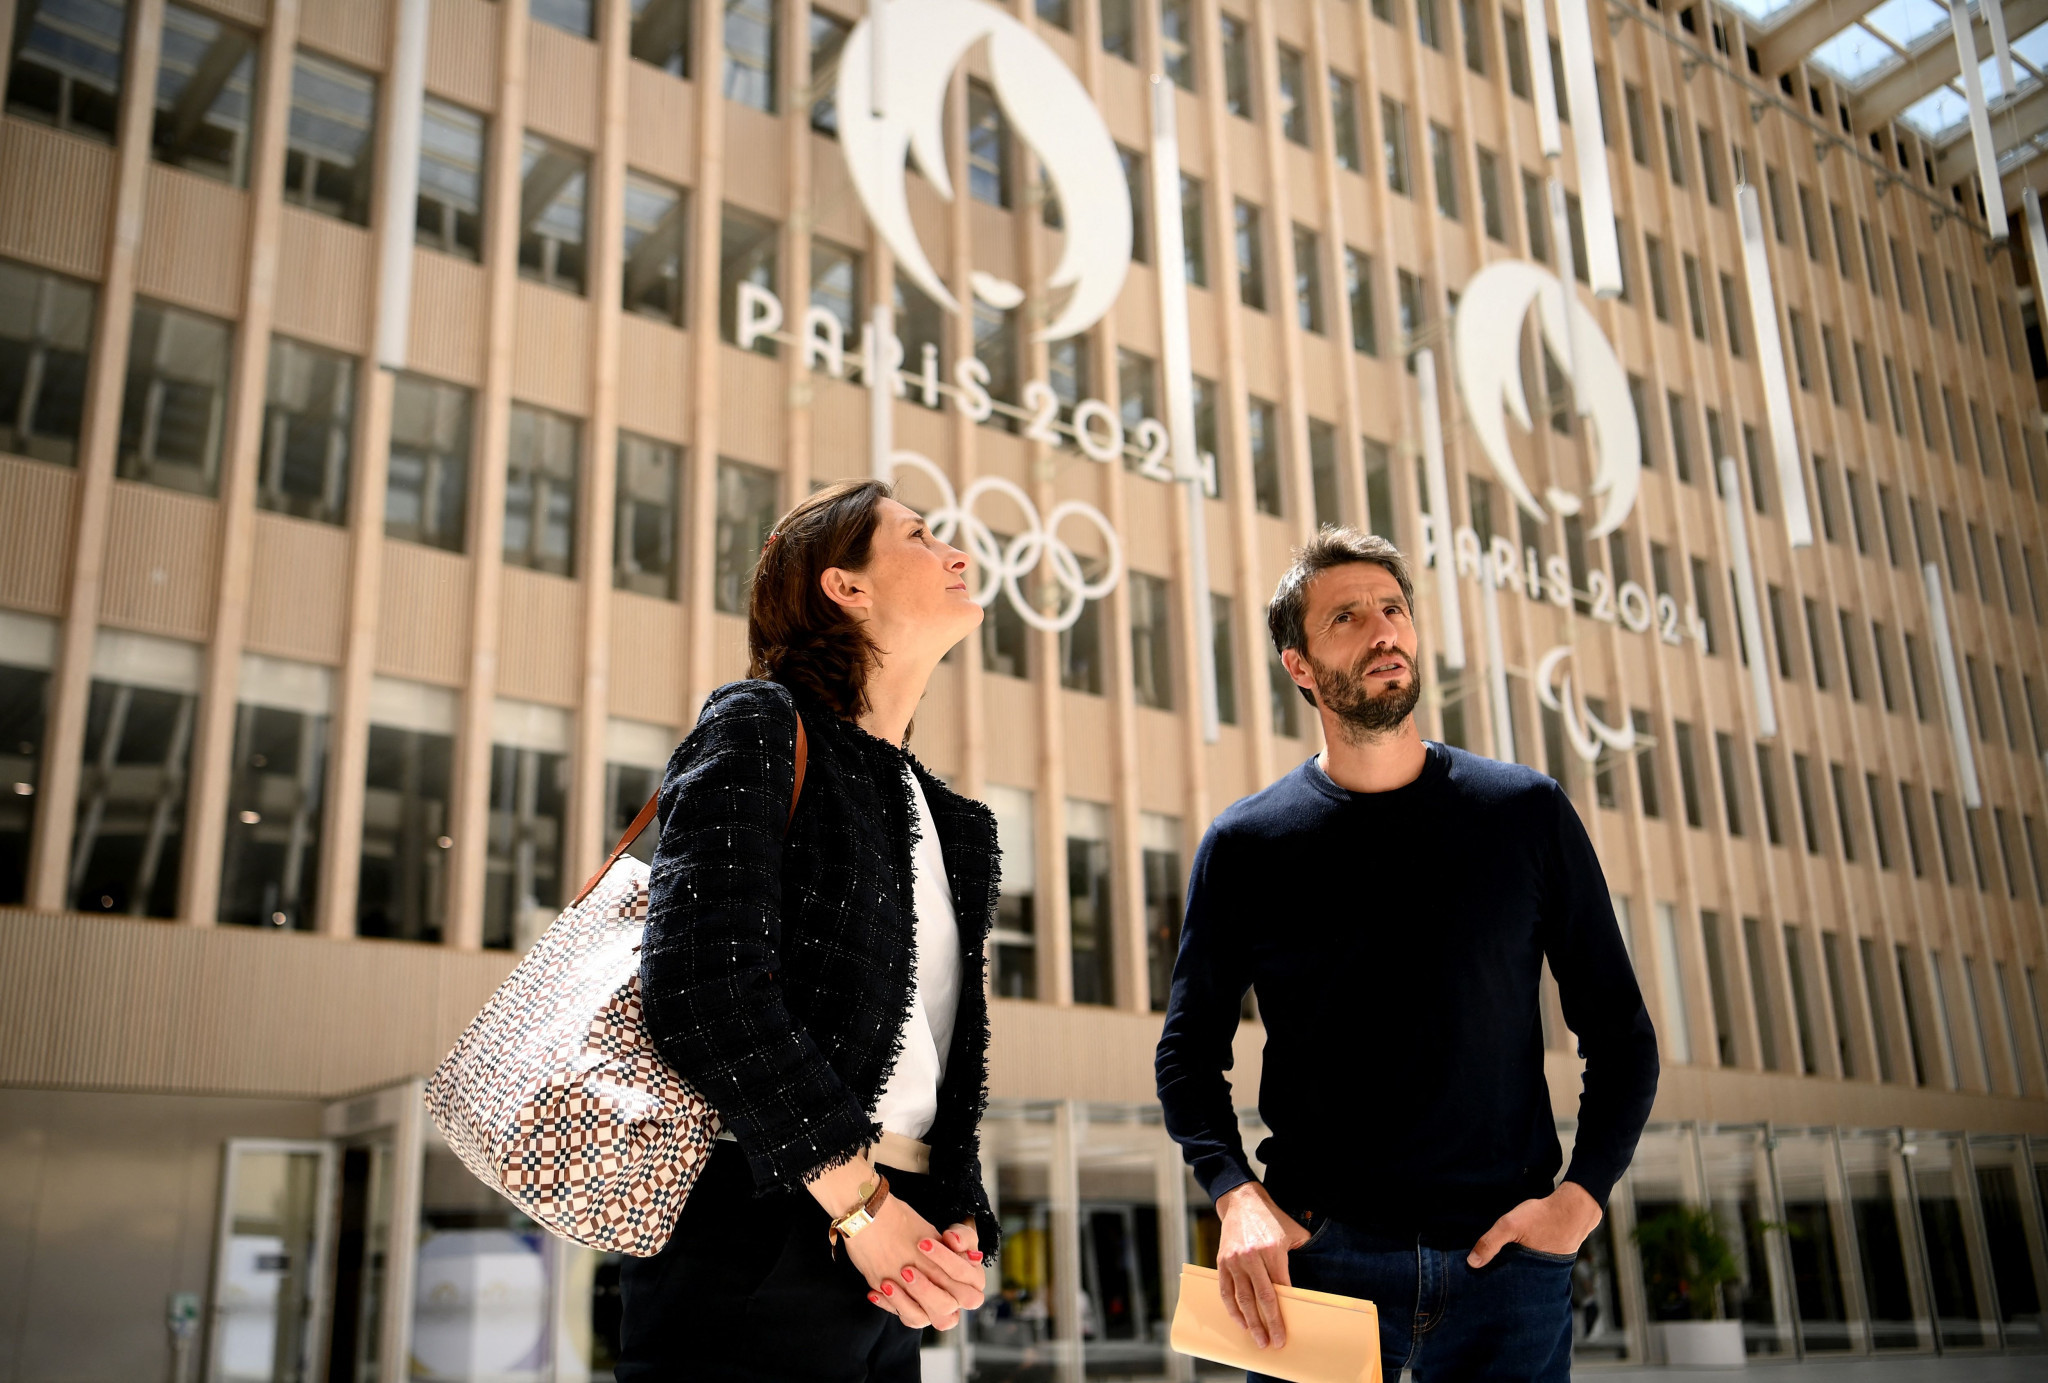 New French Minister of Sport and the Olympic and Paralympic Games Amélie Oudéa-Castéra discussed security at Paris 2024 with Organising Committee President Tony Estanguet ©Getty Images